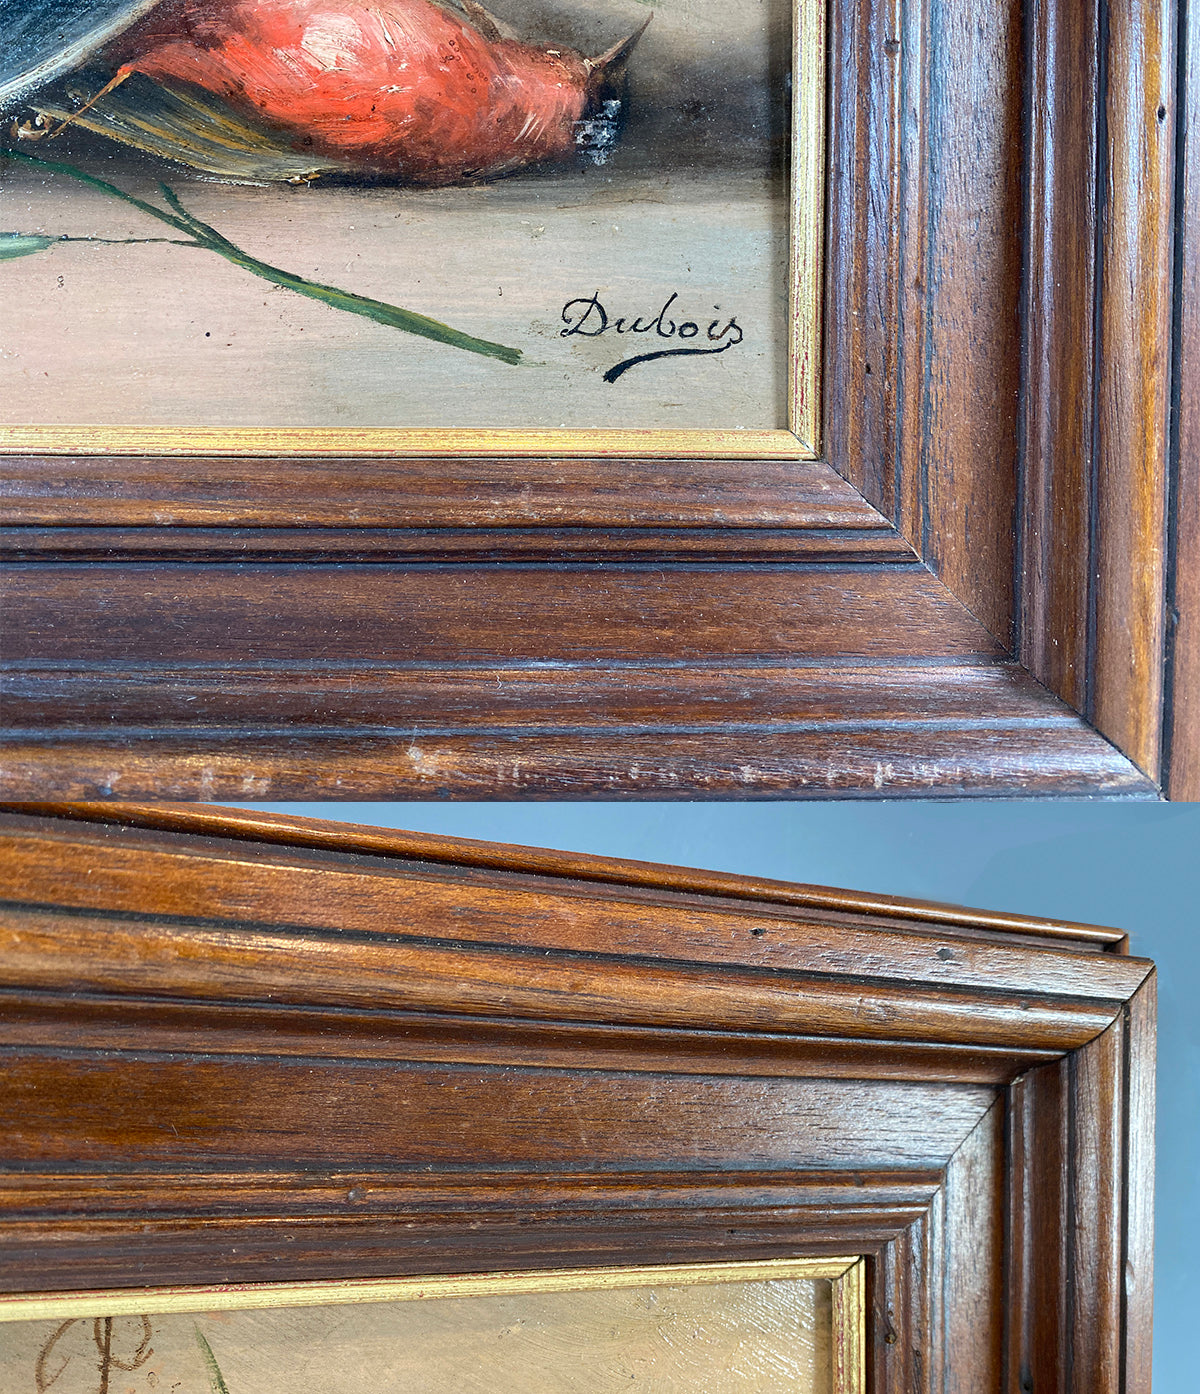 Antique to Vintage French Oil Painting Still Life of Birds "Nature Morte" Theme, Signed by Artist